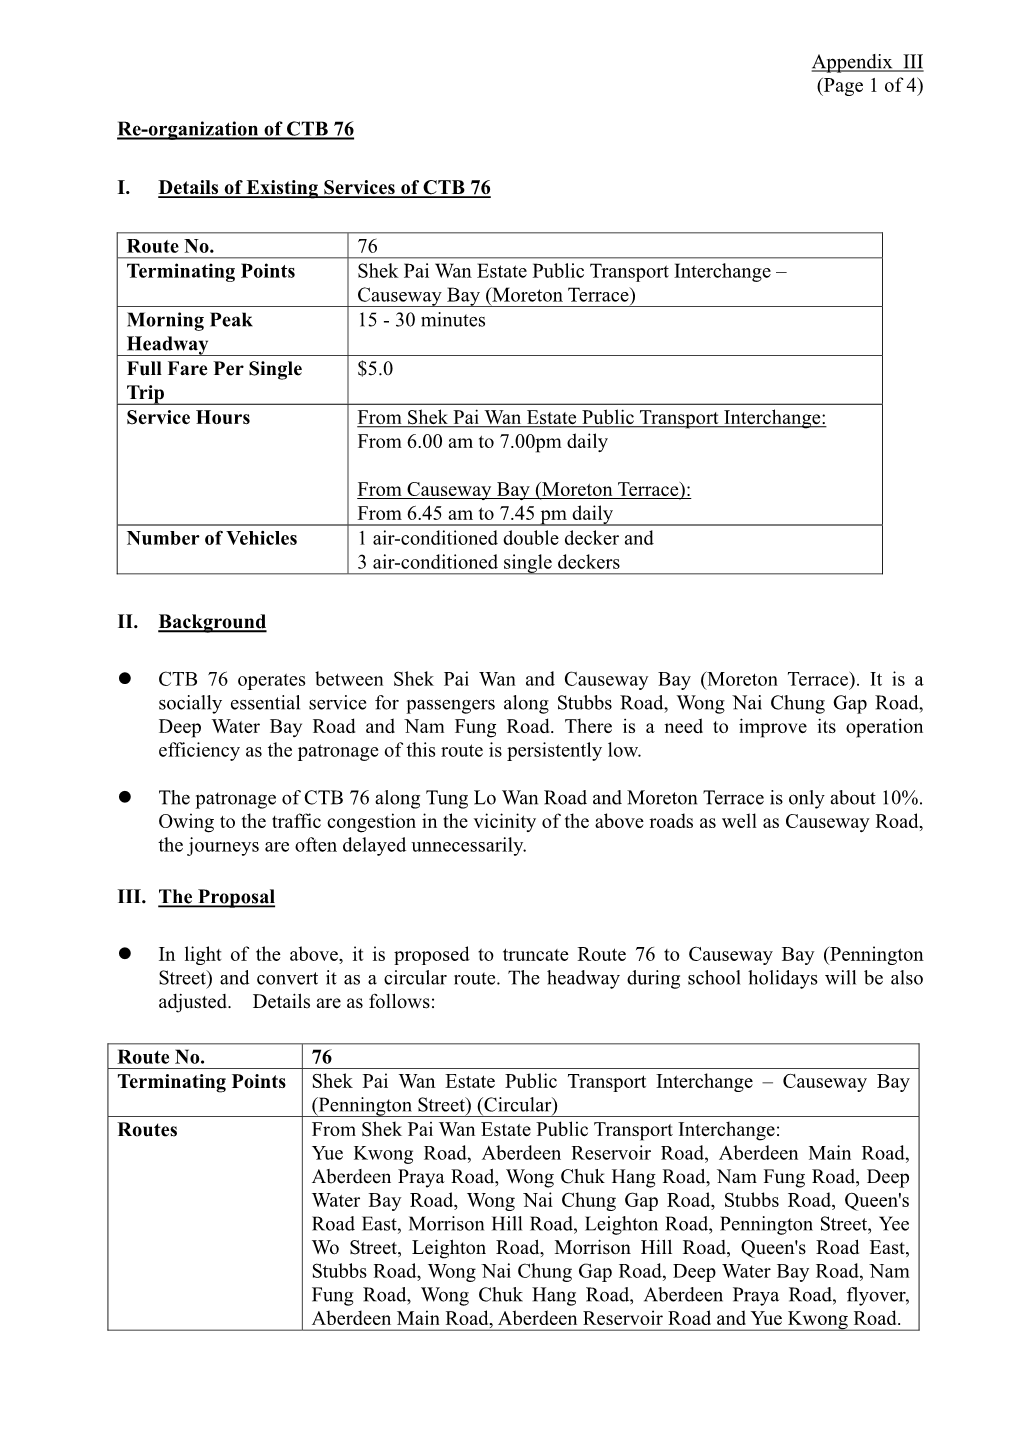 Appendix III (Page 1 of 4) Re-Organization of CTB 76 I. Details of Existing Services of CTB 76 Route No. 76 Terminating Points S